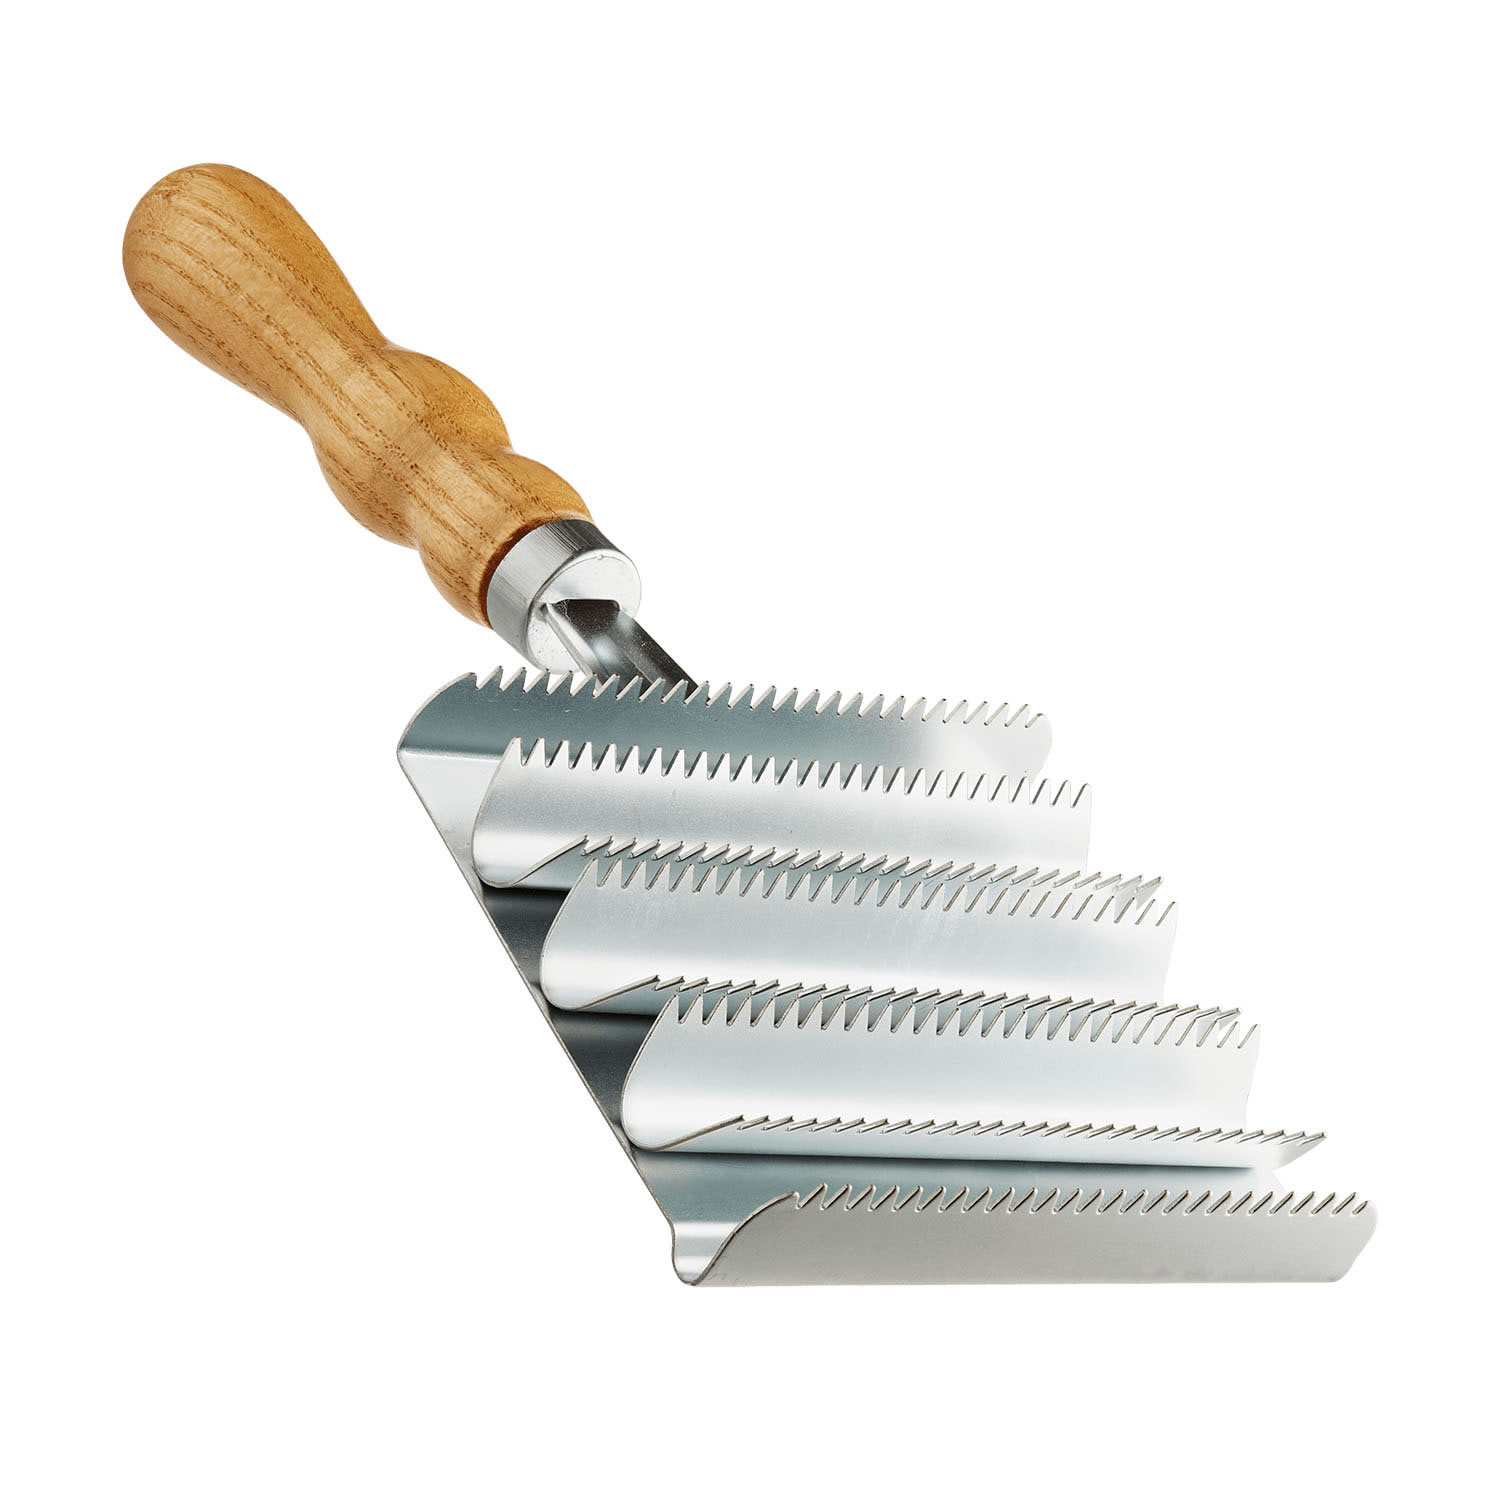 BITZ CURRY COMB METAL WITH HANDLE NATURAL